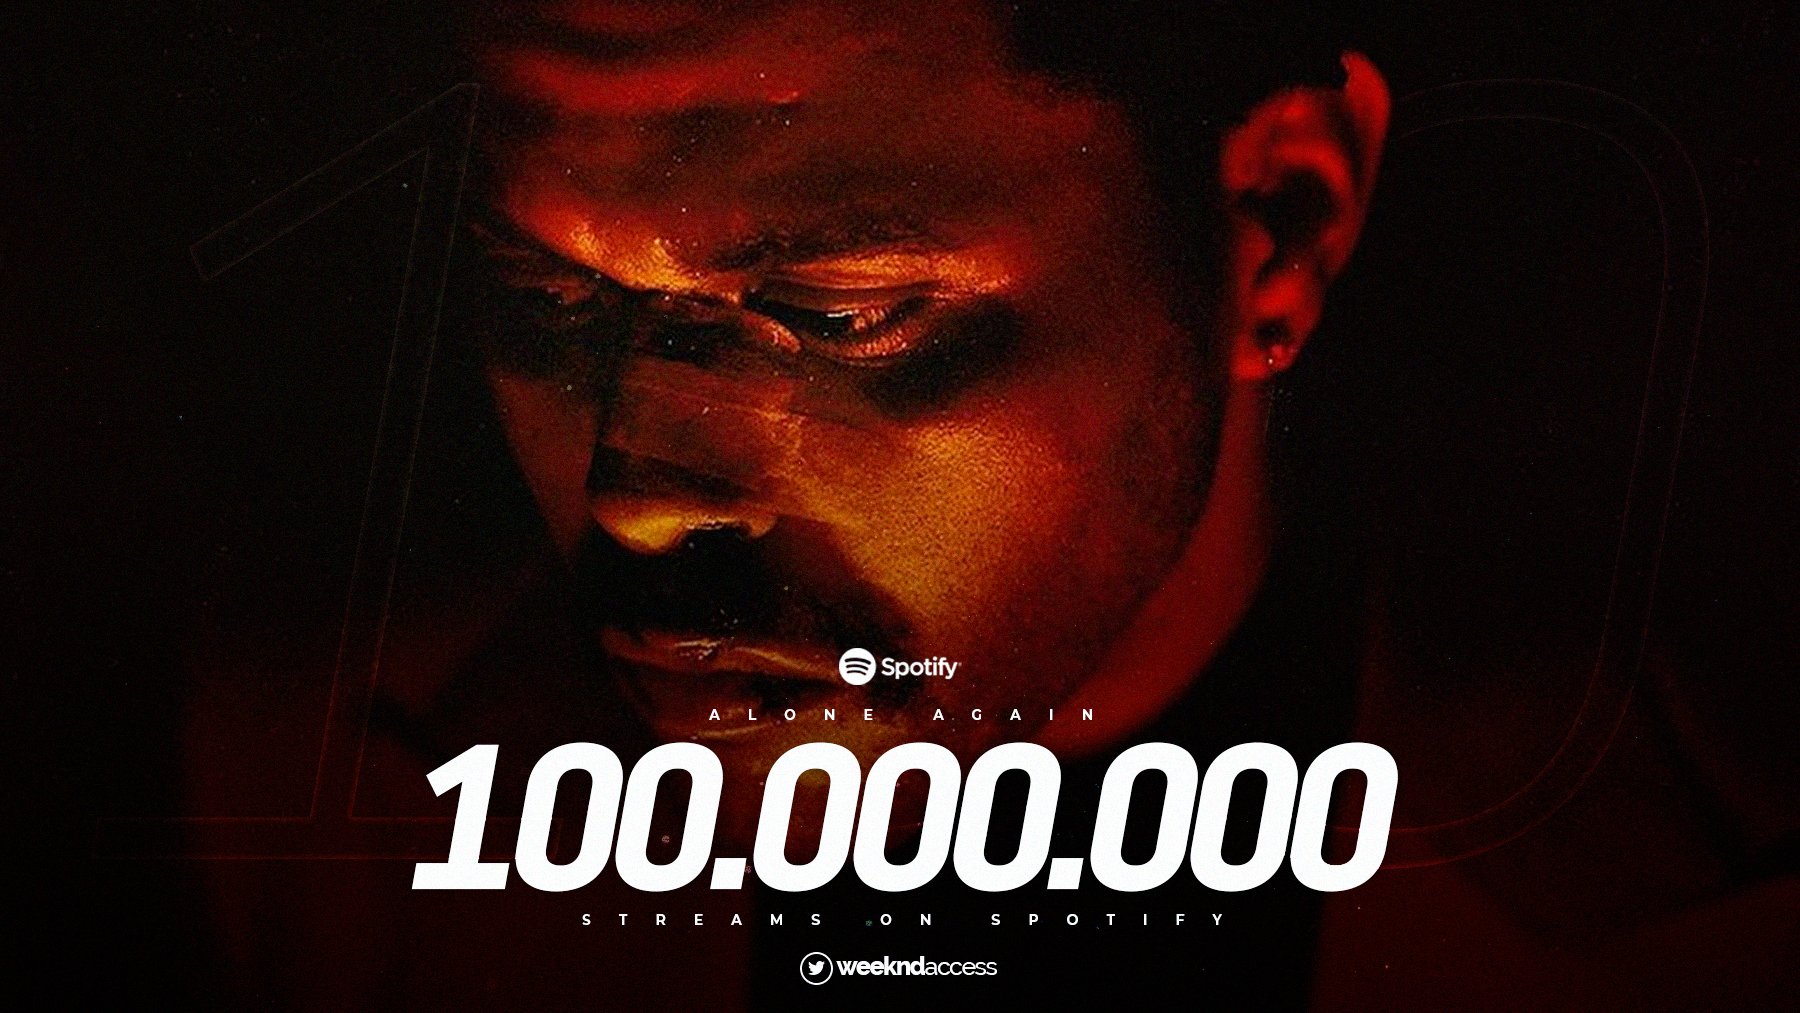 The Weeknd World on X: .@theweeknd's 'Alone Again' has now surpassed 100  MILLION streams on Spotify. — This is Abel's 71st song to achieve this.   / X